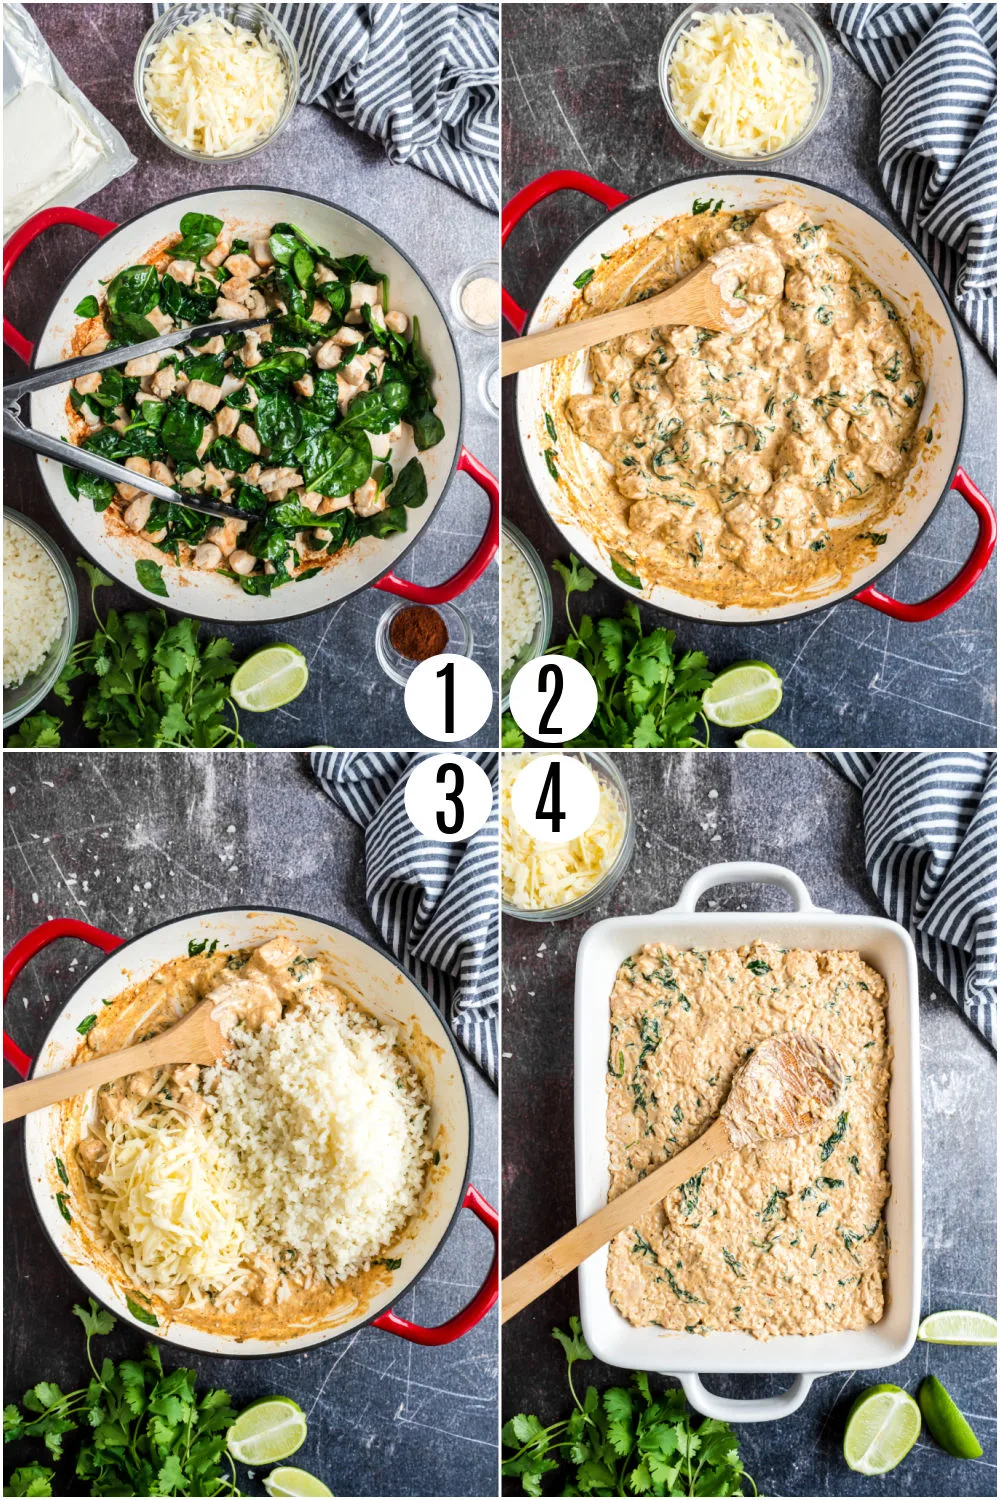 Step by step photos showing how to make chicken and cauliflower rice casserole.